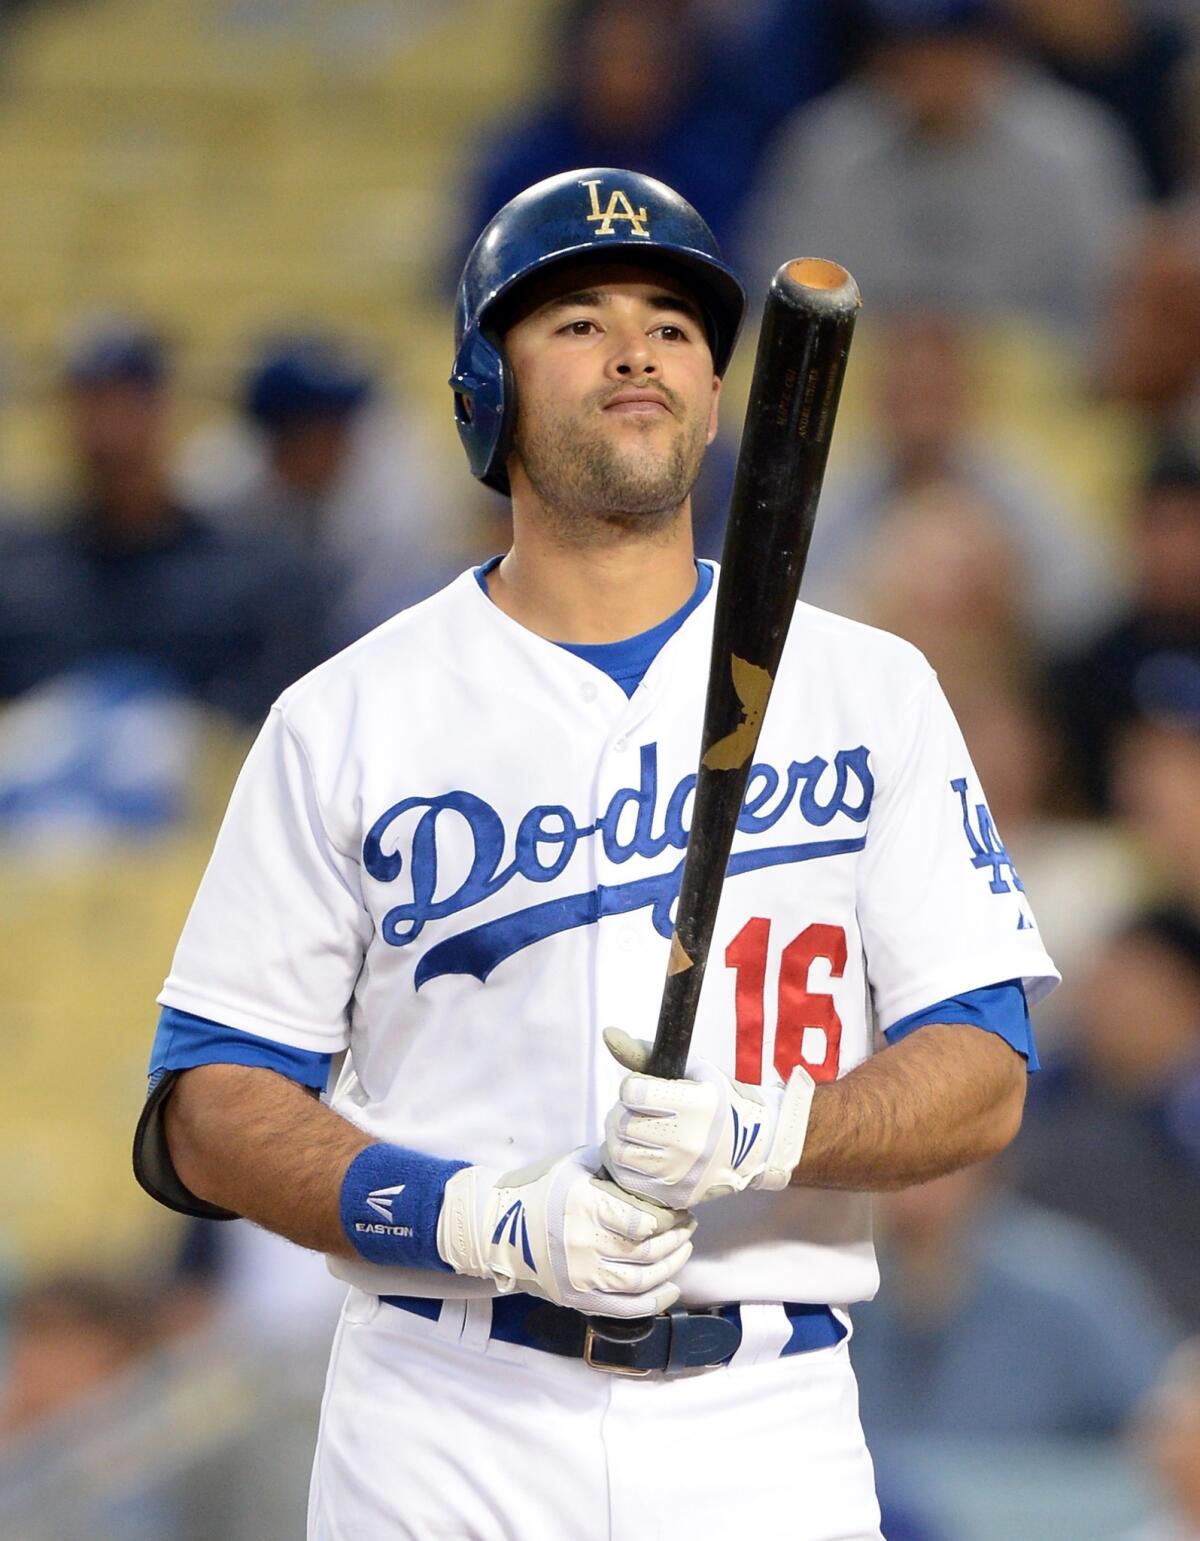 Andre Ethier probably won't be patrolling center field for the Dodgers in their National League division series matchup with the Atlanta Braves, but he could be called on to hit.